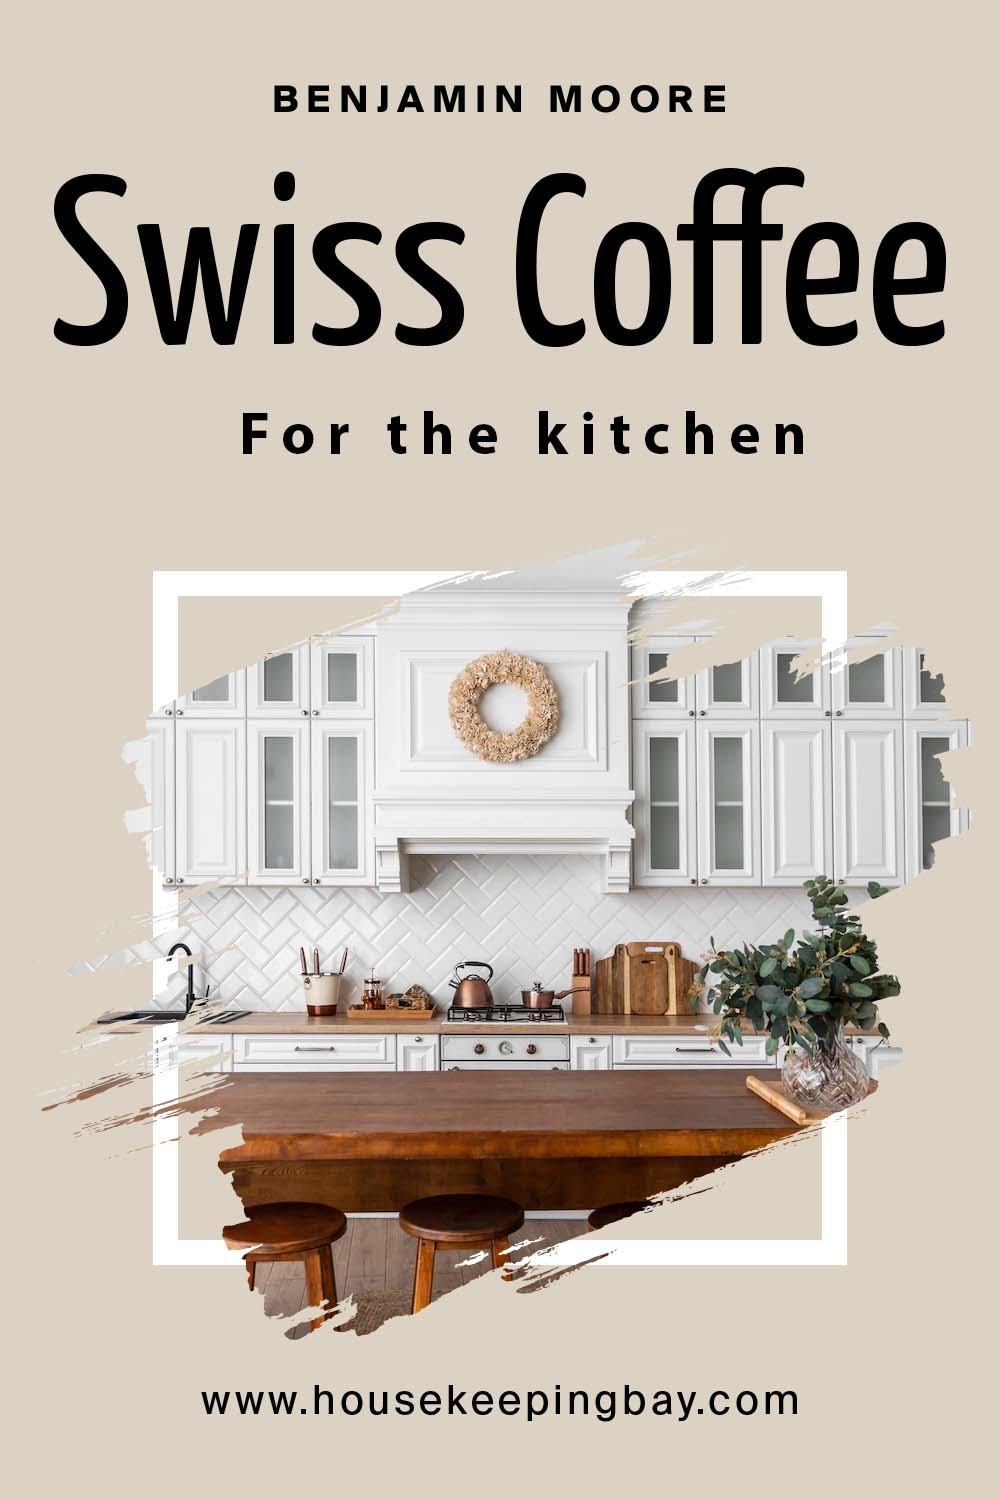 swiss coffee oc-45 by benjamin moore for the kitchen